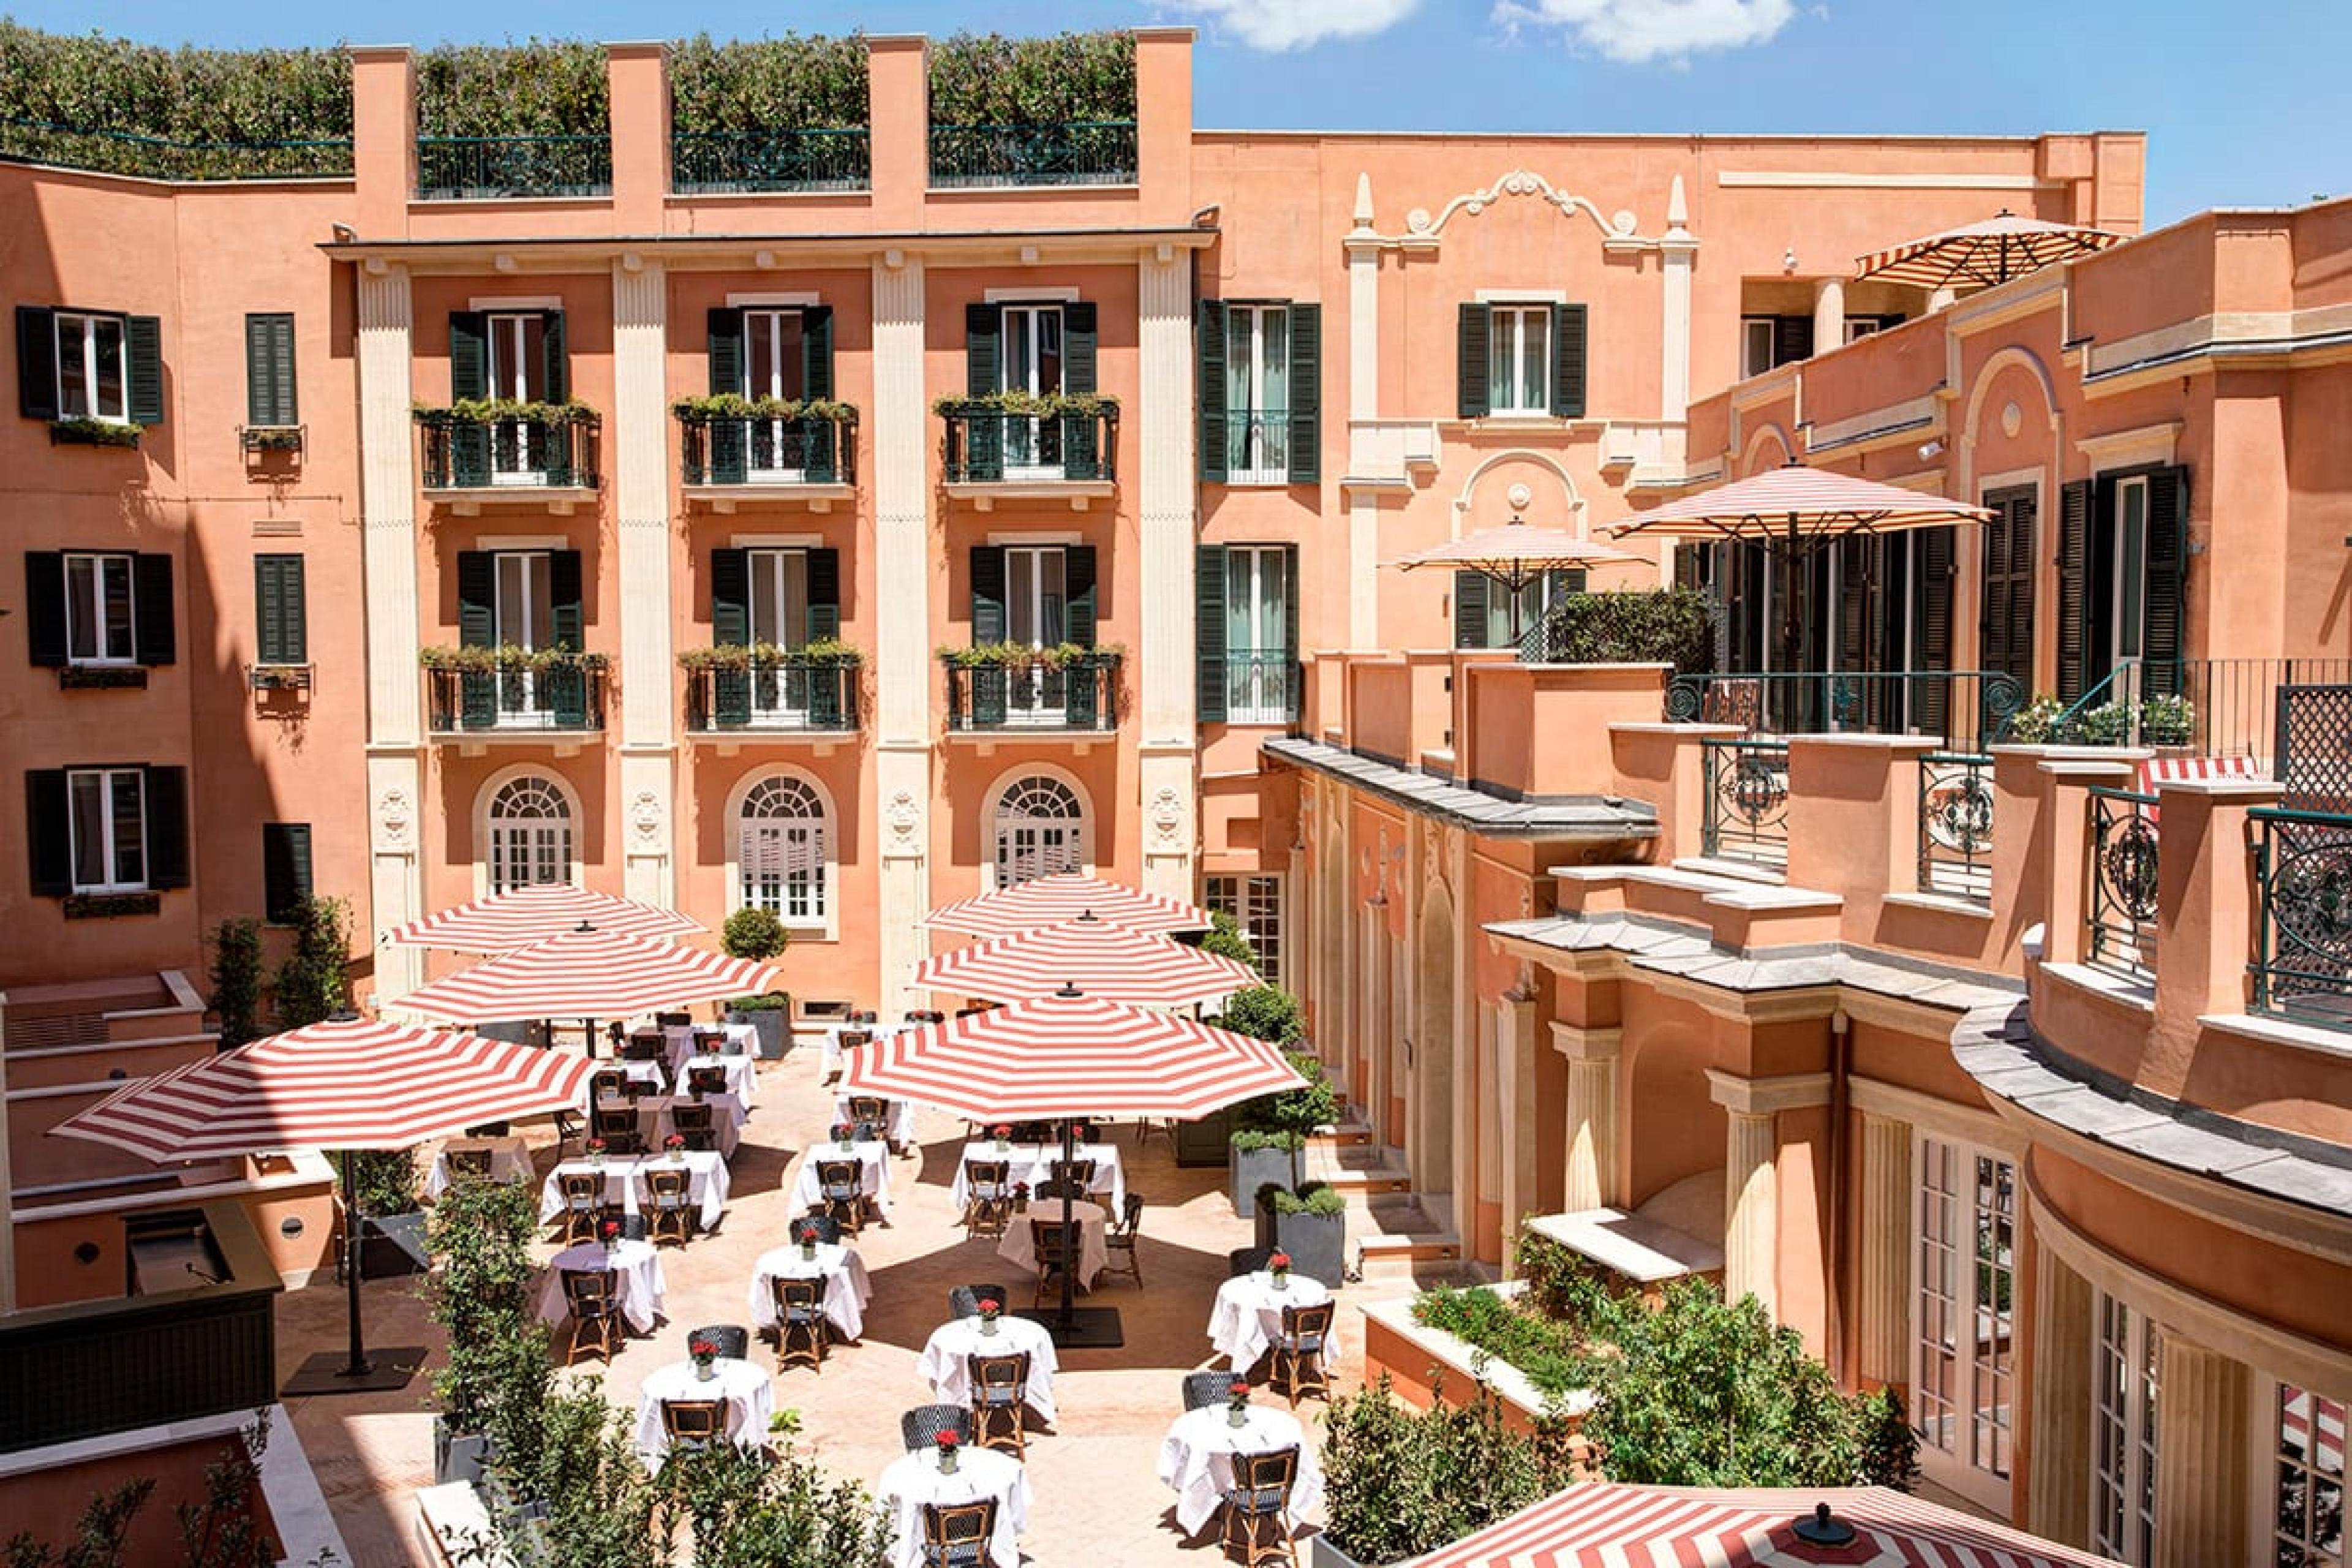 courtyard of grand hotel in rome with lots of restaurant seating and hotel balconies above it